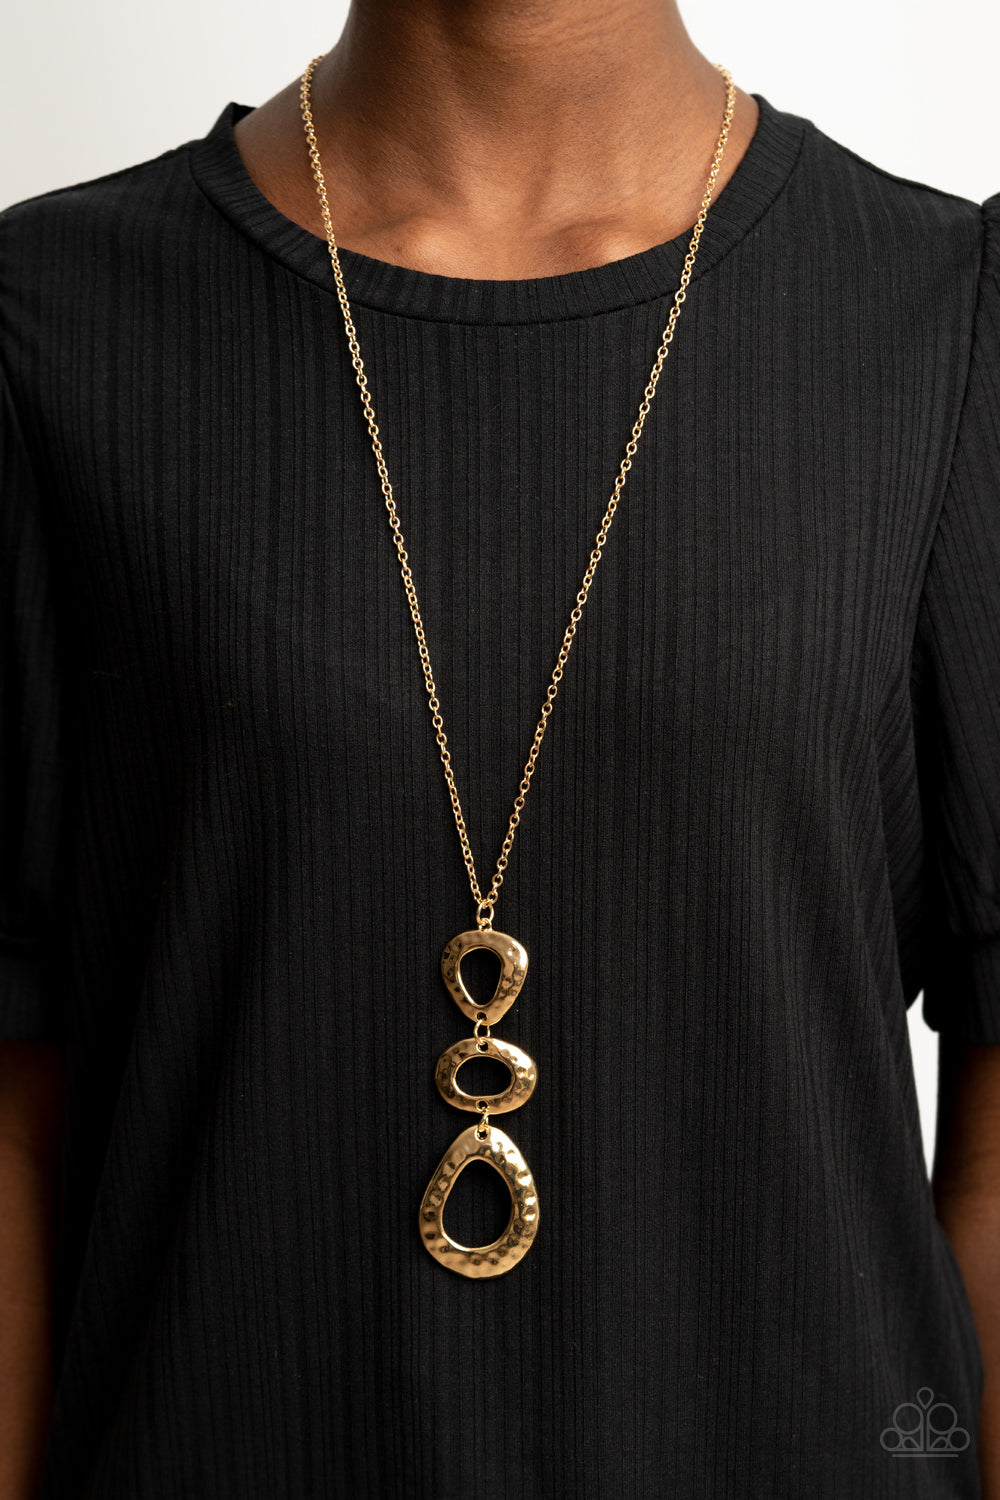 Gallery Artisan Gold-Necklace